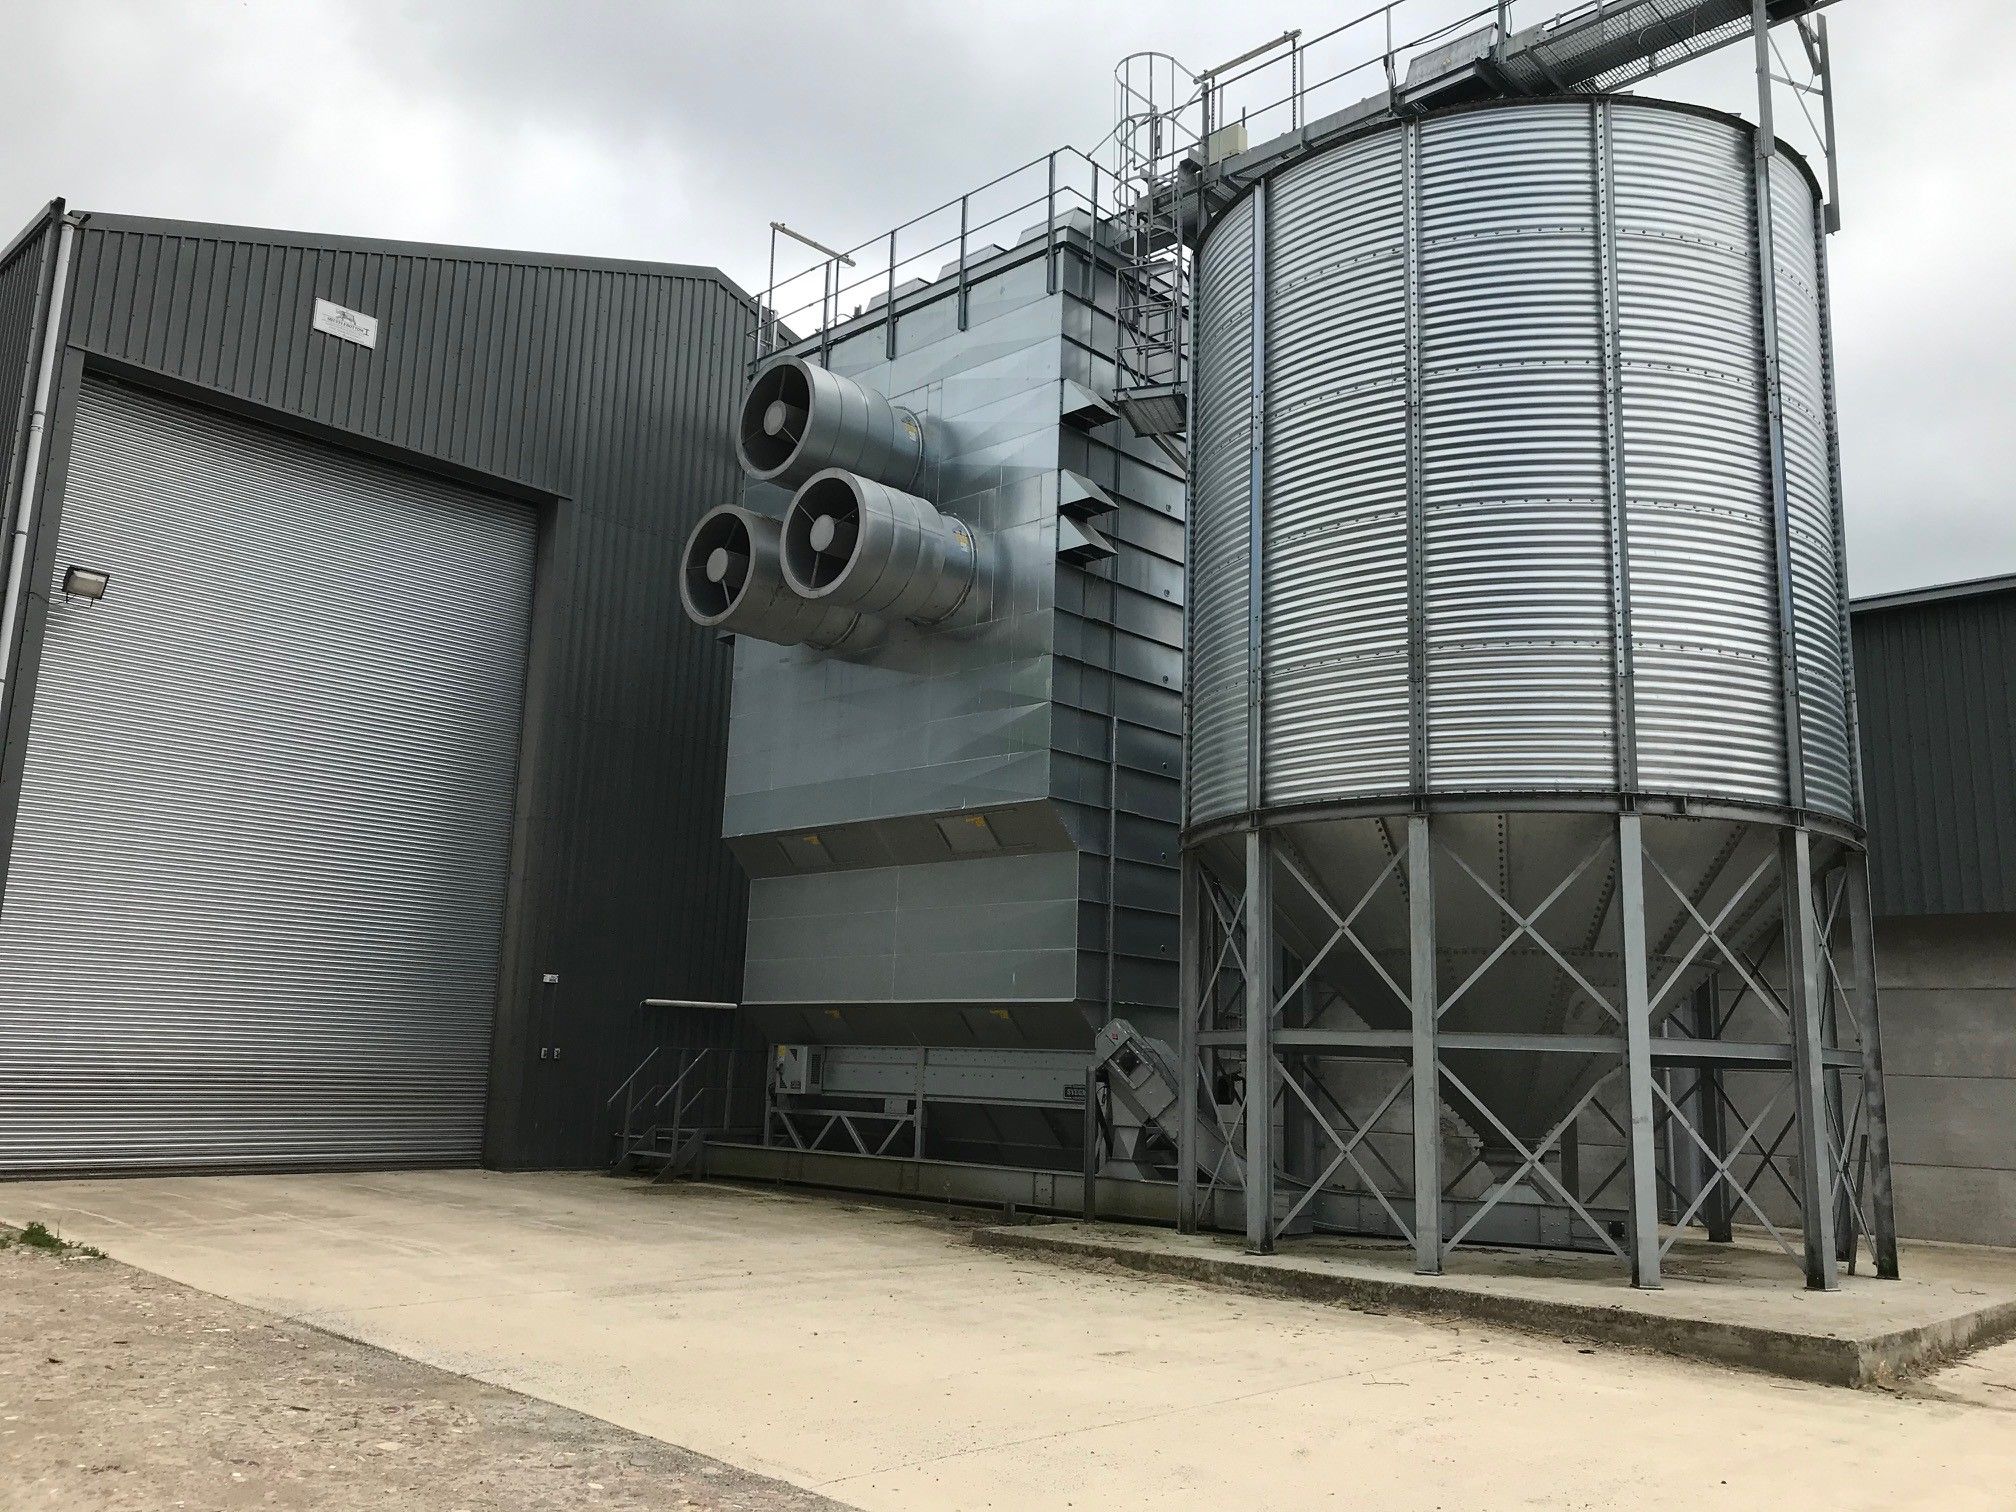 BDC Systems Ltd and Nash Grain Services successfully meet J A & D Cottrell’s requirements for new grain drying and storage plant